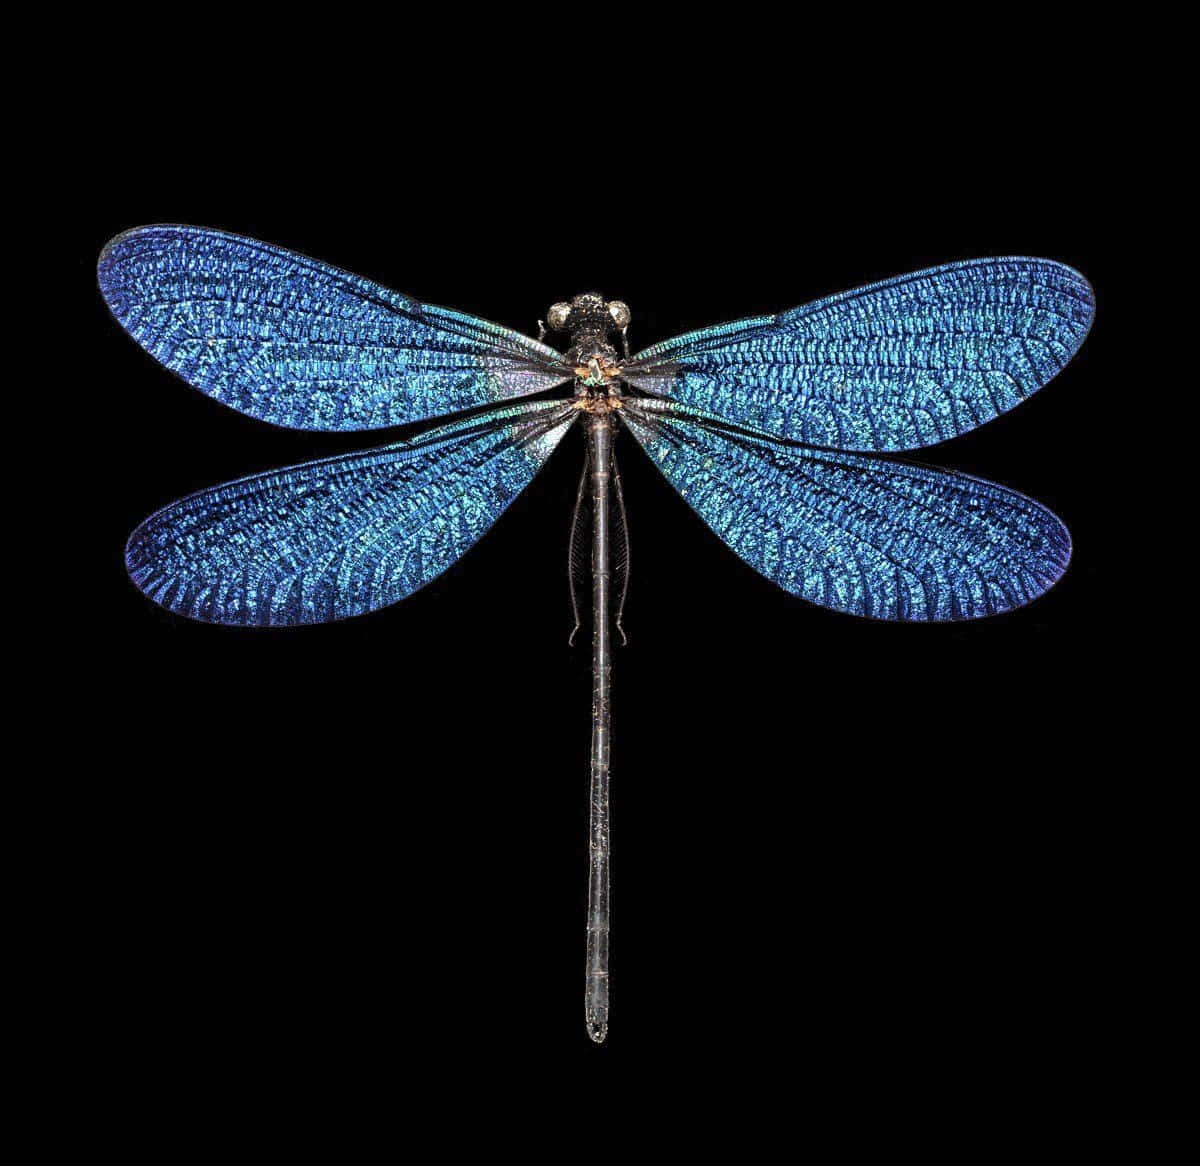 Colorful Blue Dragonfly Wallpaper